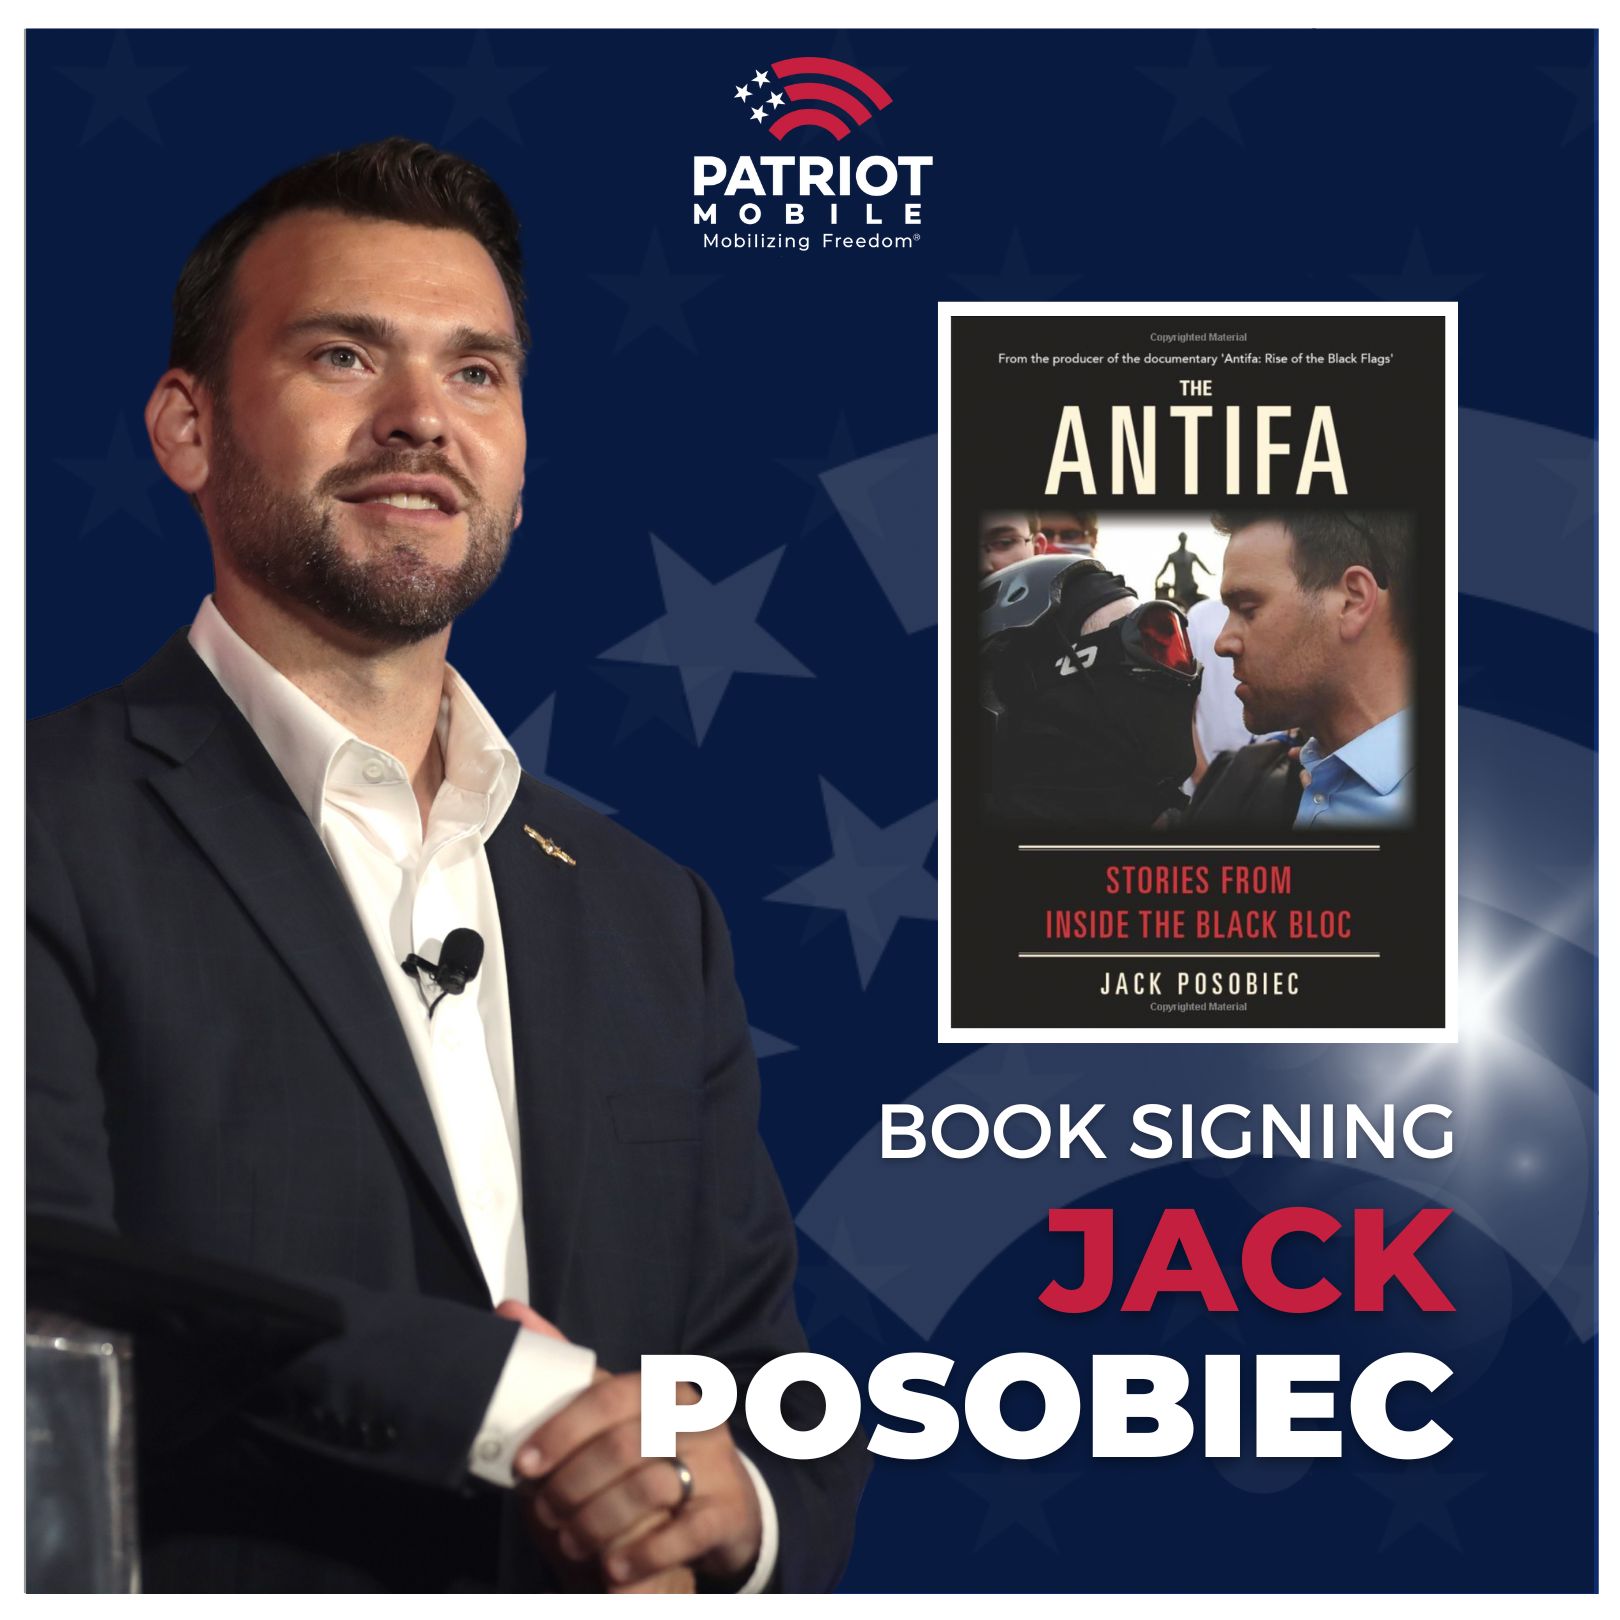 Jack Posobiec book signing with Patriot Mobile